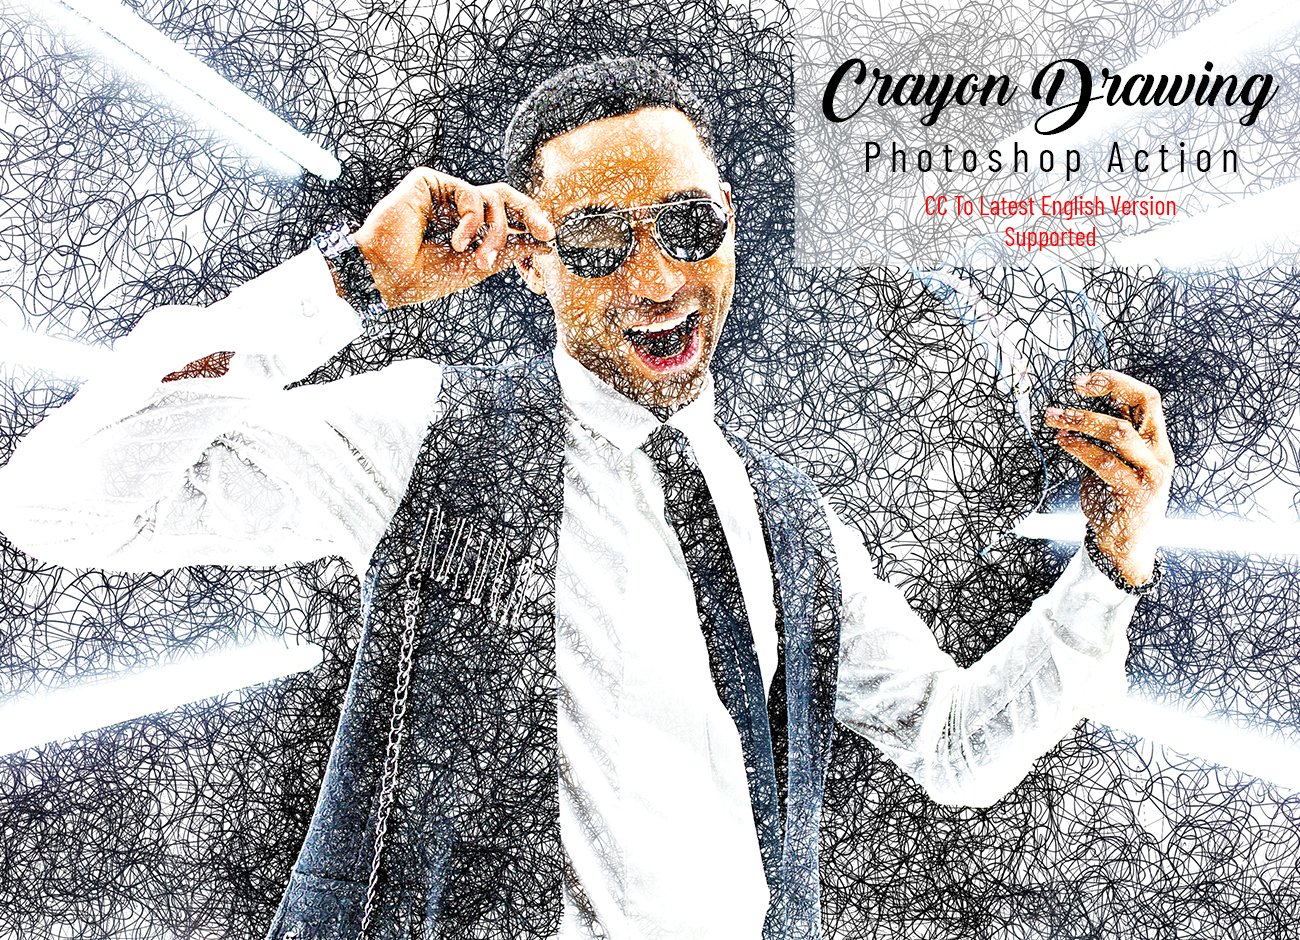 Crayon Drawing Photoshop Actioncover image.